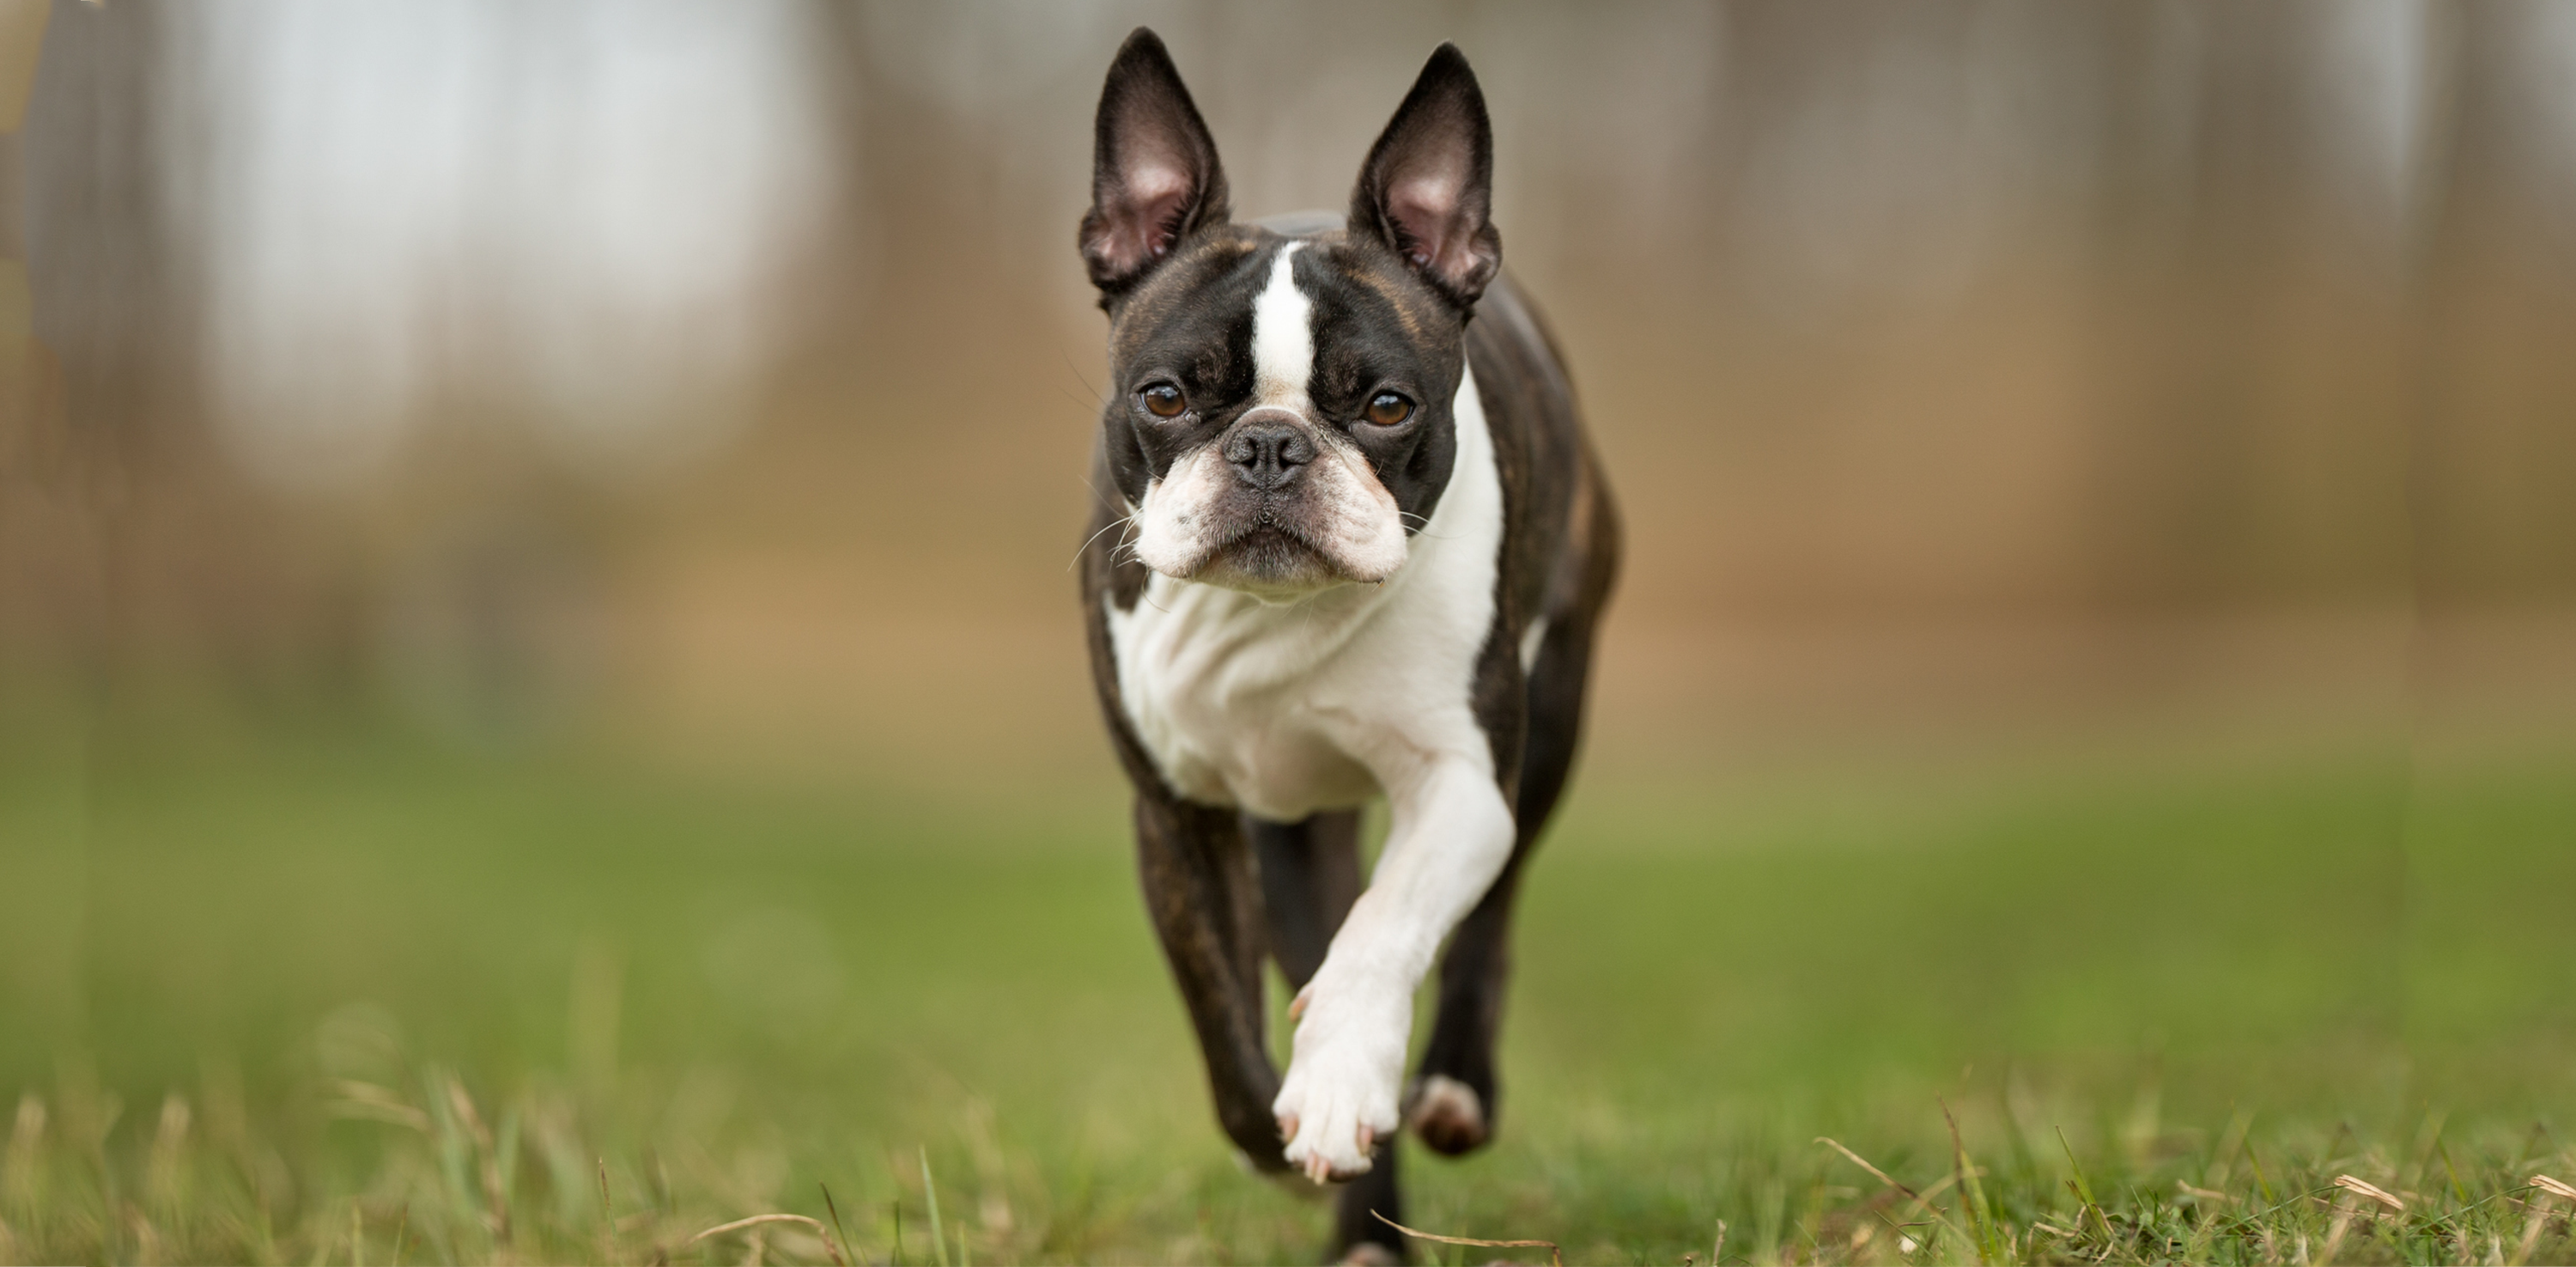 how much should a boston terrier weight at 4 months